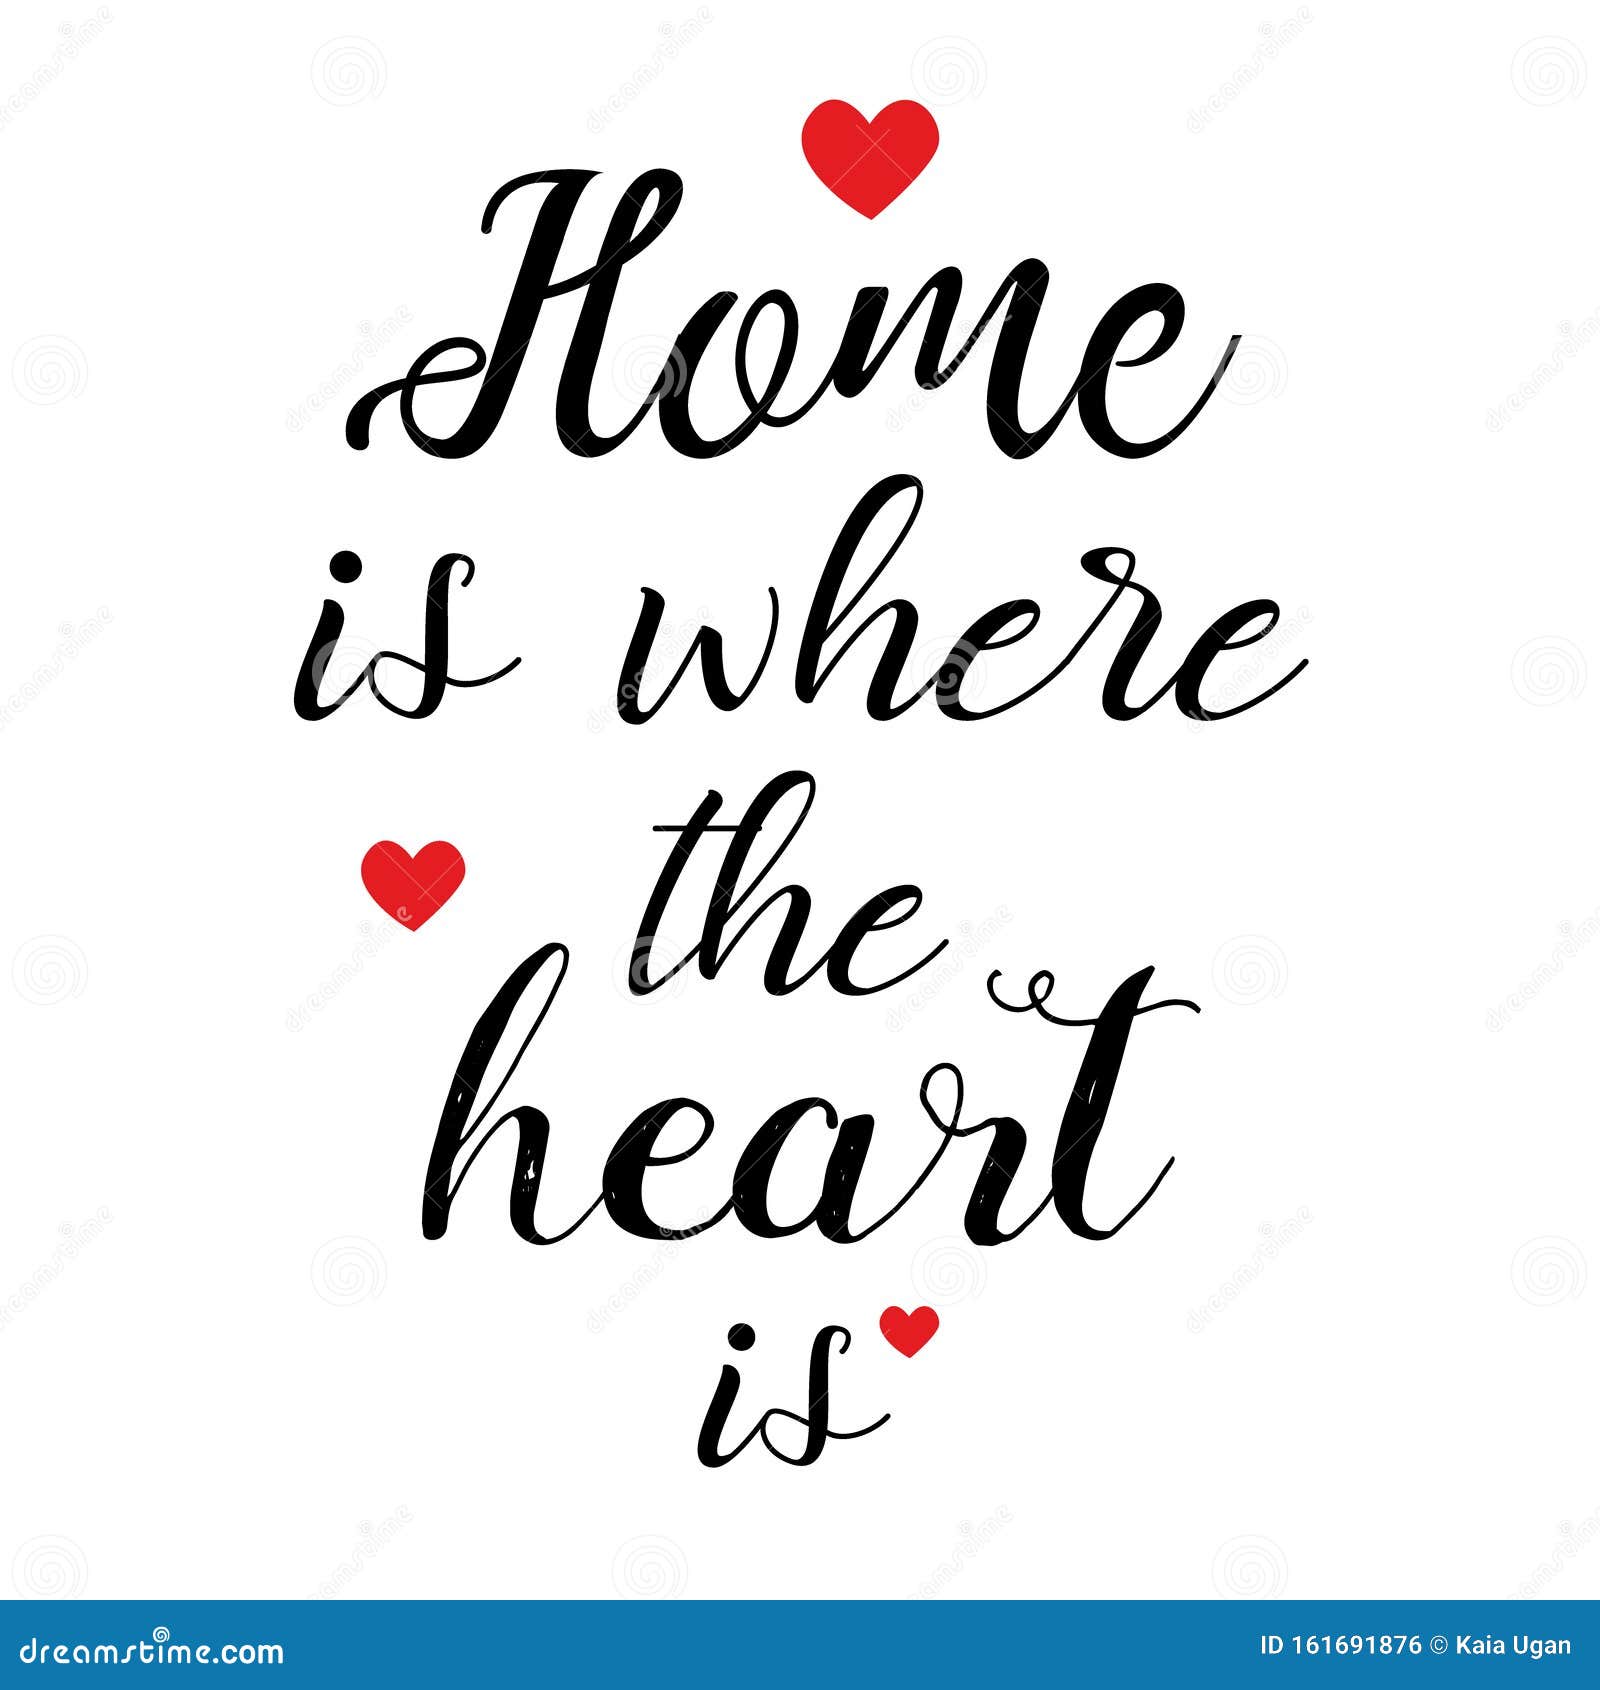 Home Where Heart Stock Illustrations 297 Home Where Heart Stock Illustrations Vectors Clipart Dreamstime,Kitchen Cabinet Storage Solutions Home Depot